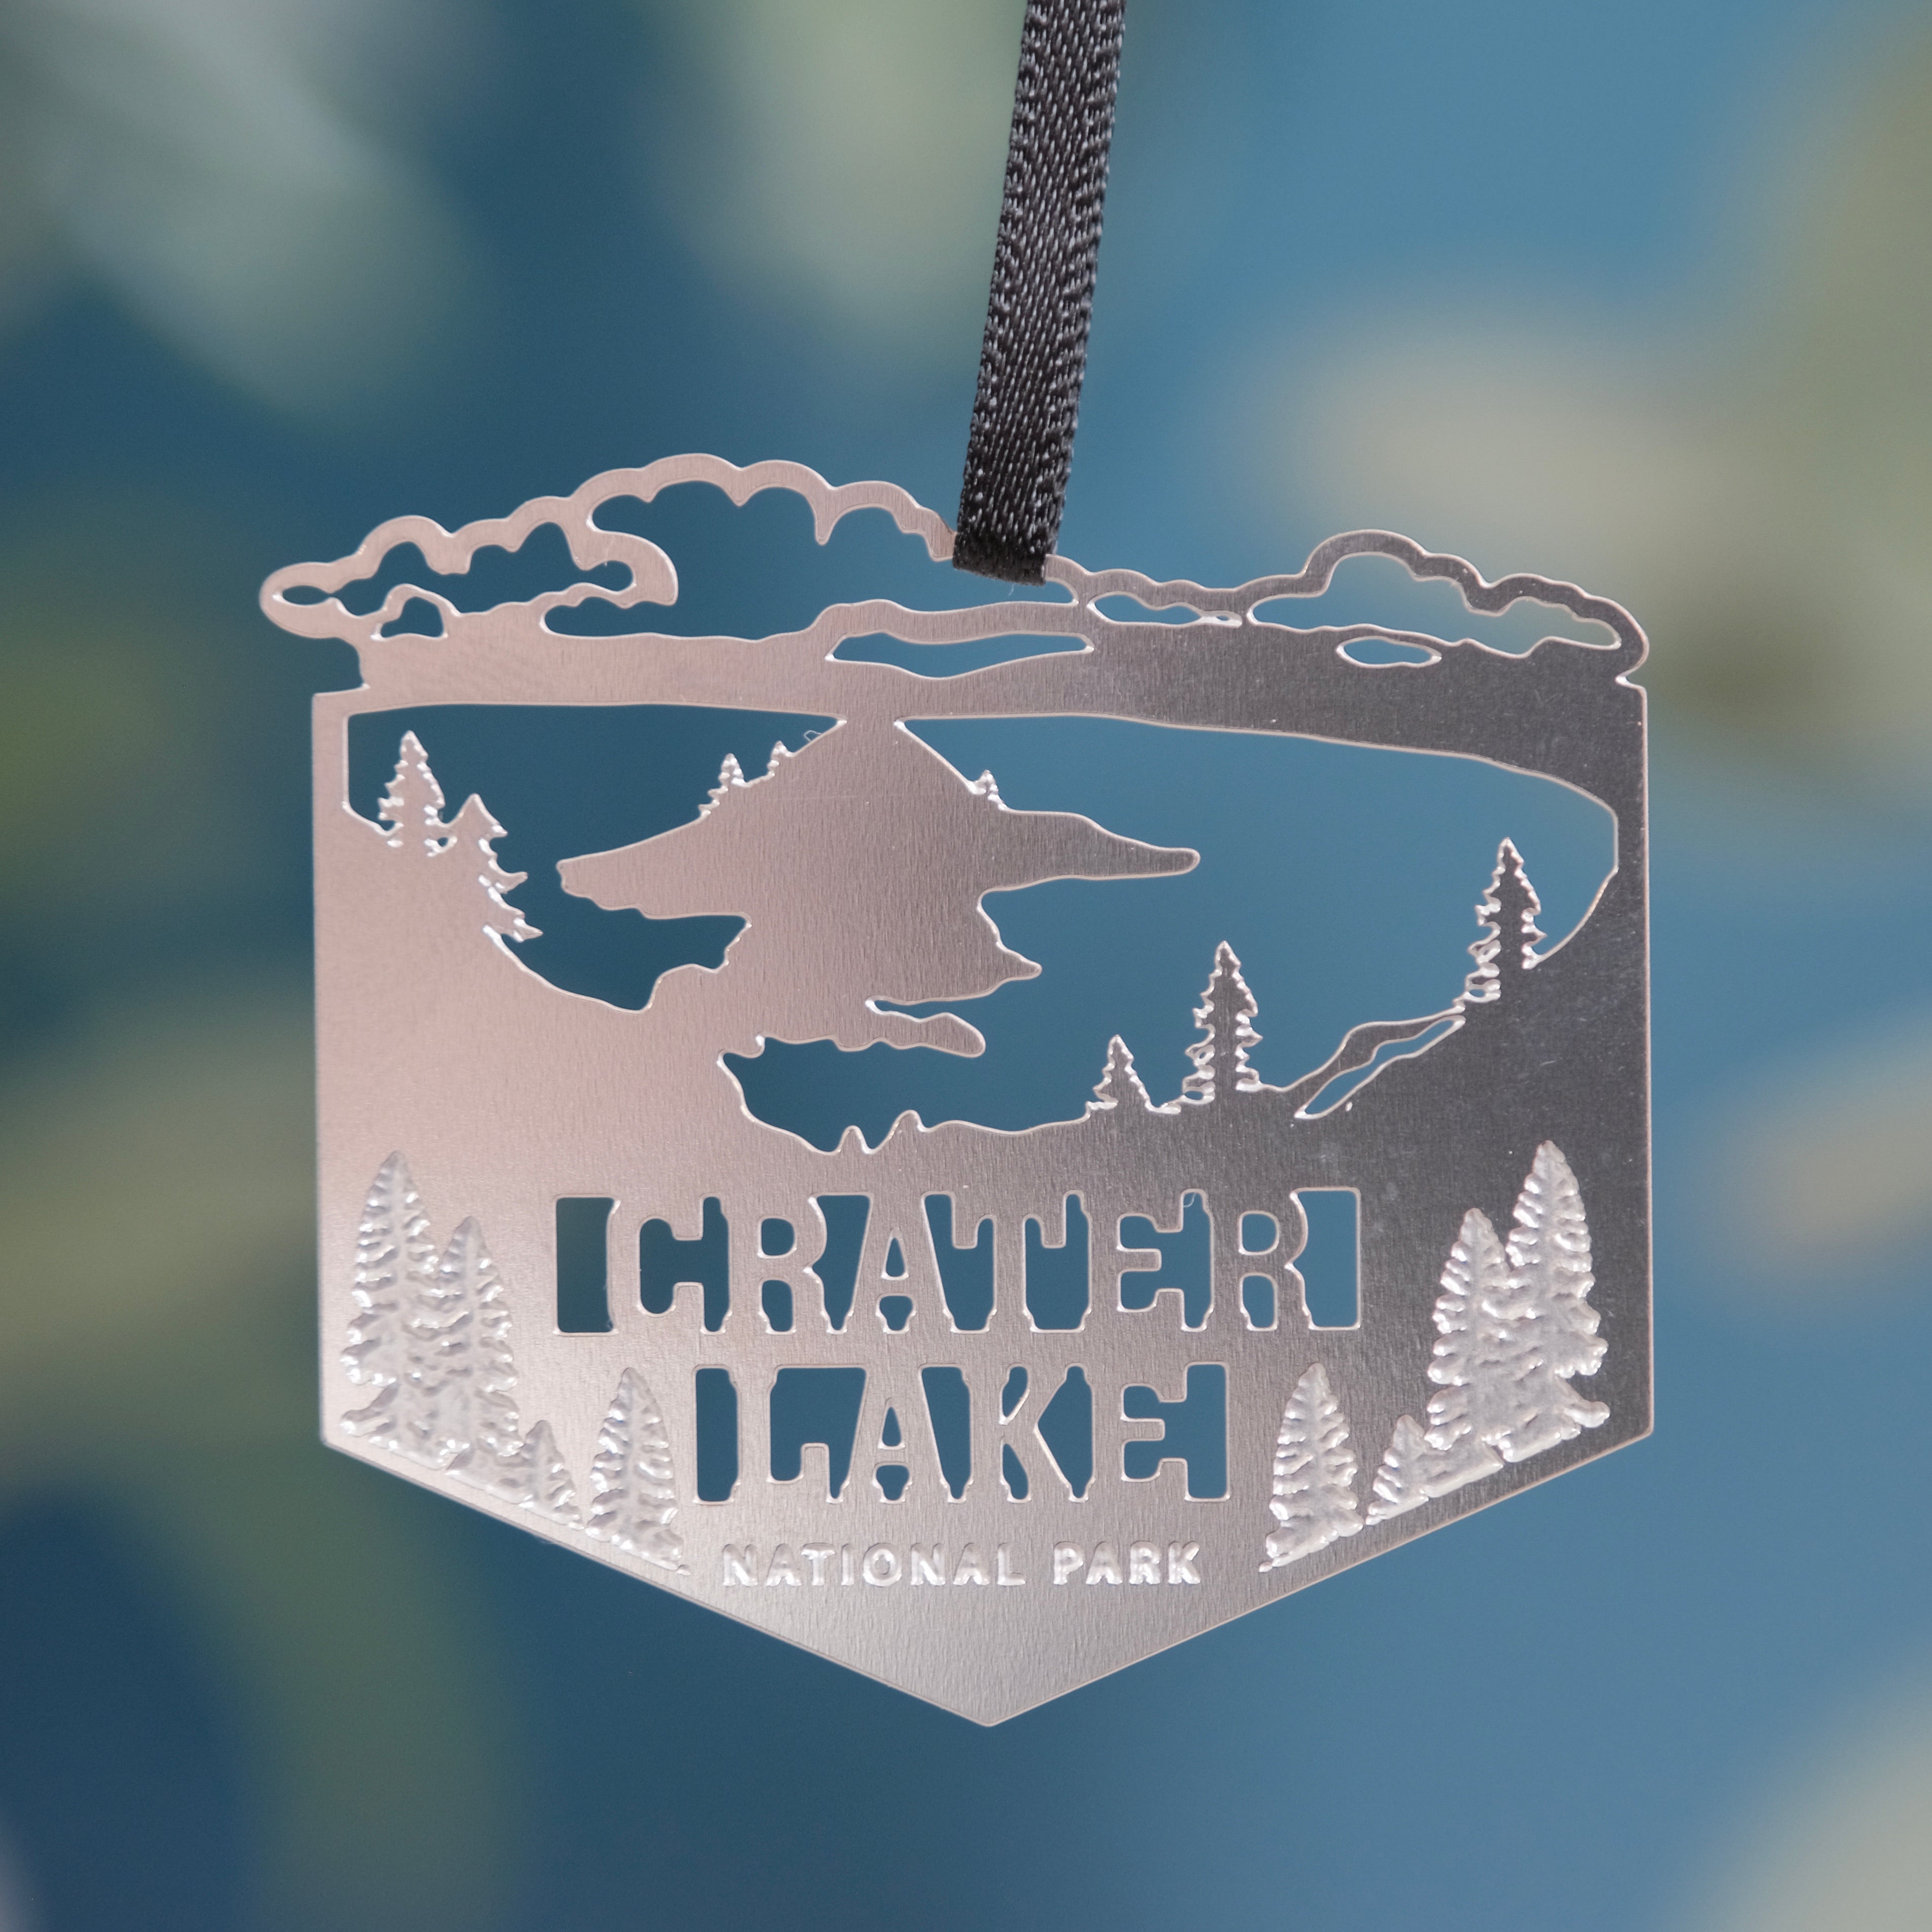 Crater lake National park Ornament - Collectable